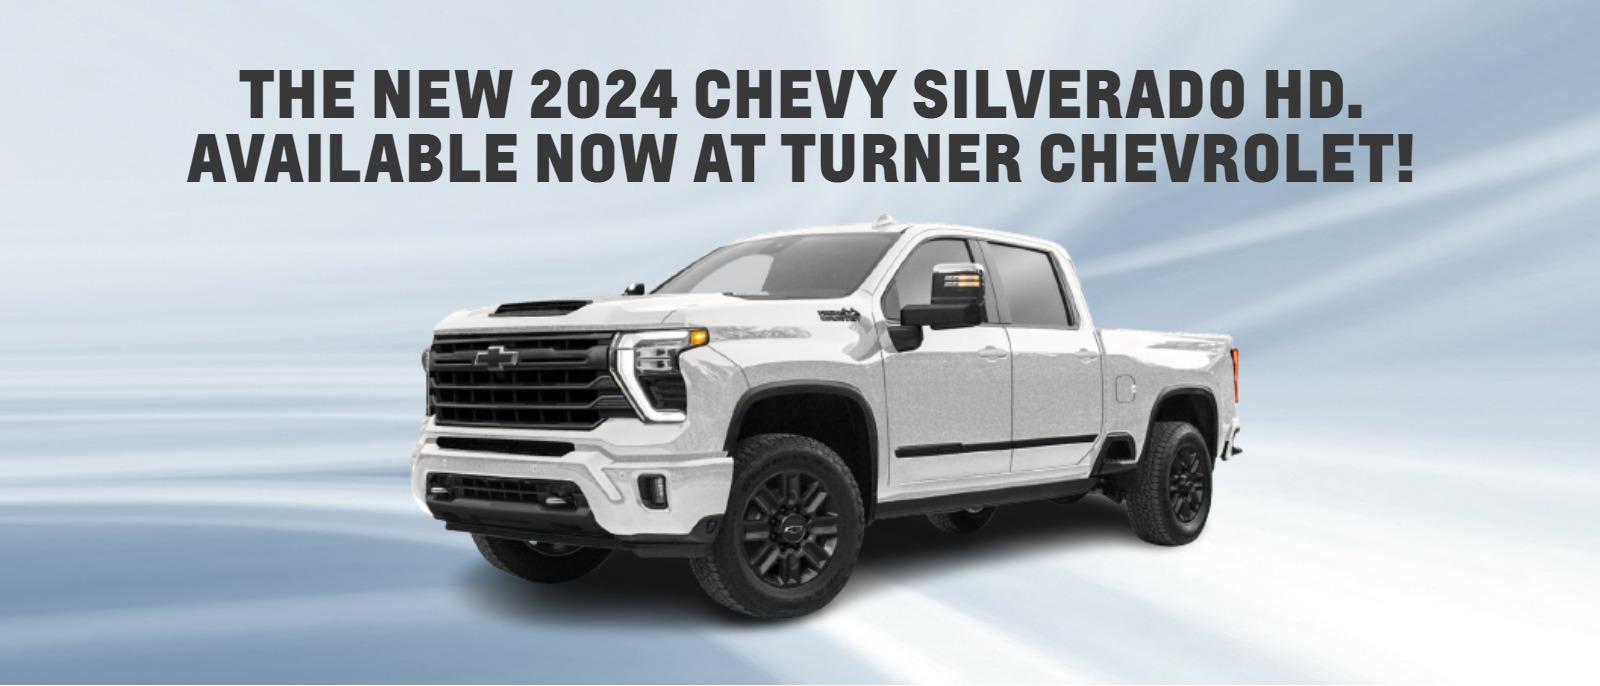 THE NEW 2024 CHEVY SILVERADO HD.
AVAILABLE NOW AT J K CHEVROLET